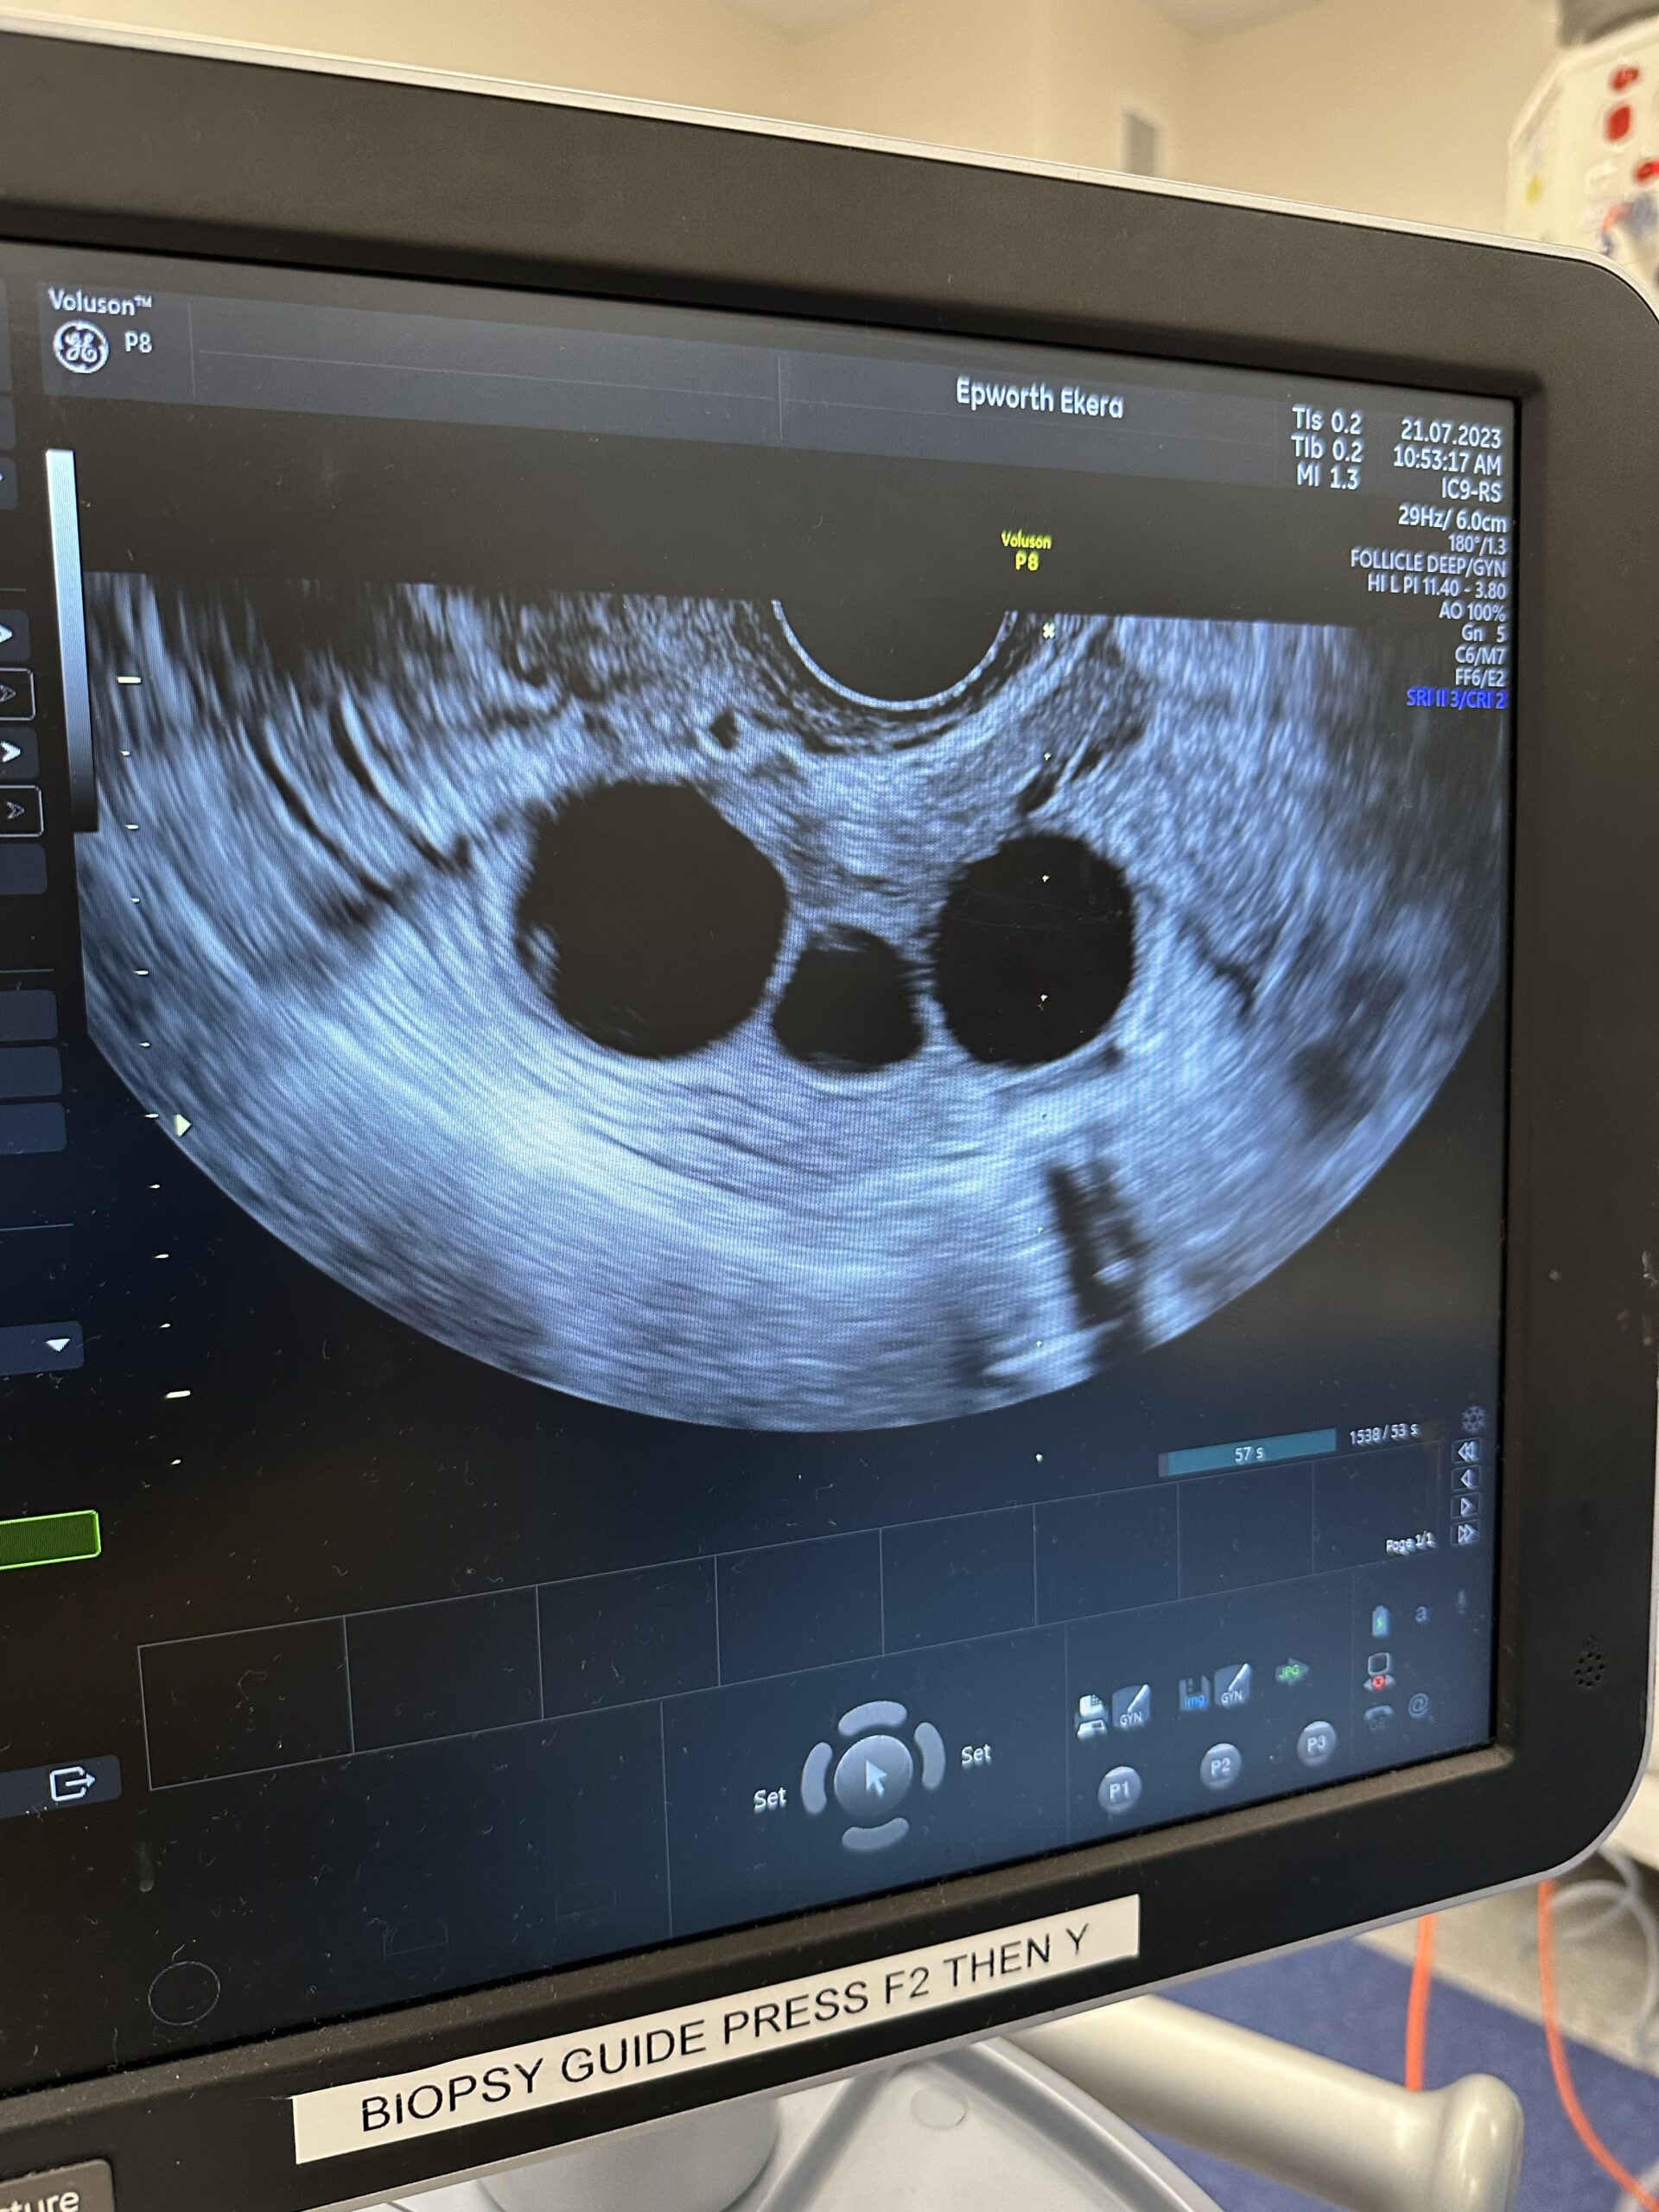 An ultrasound image showing the number of follicles within a woman's ovary